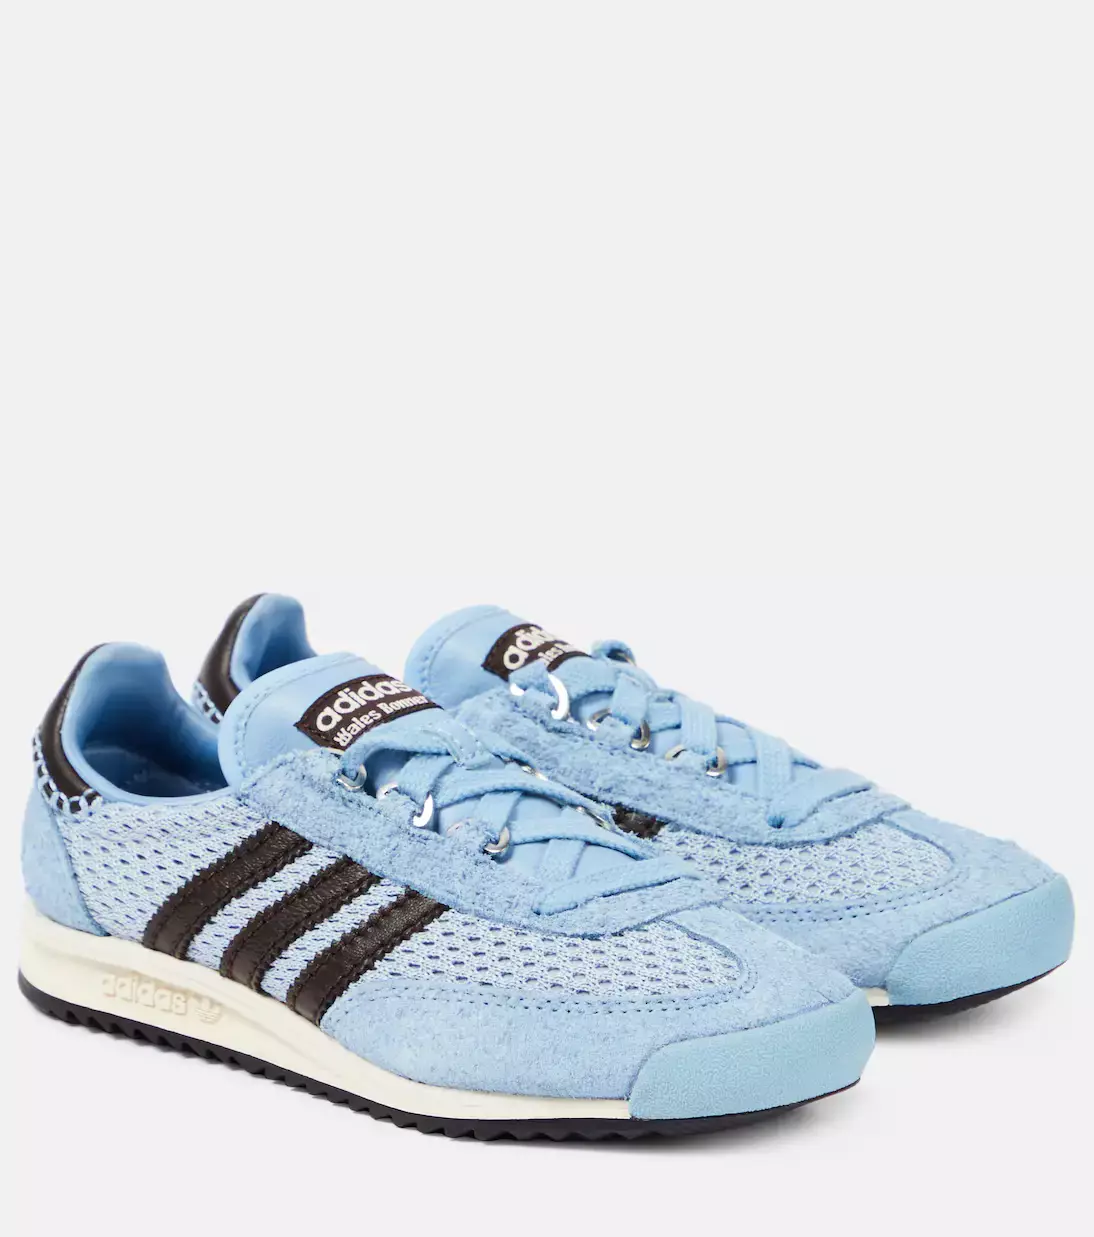 Adidas X Wales Bonner Sl76 Leather Trimmed Sneakers In Blue